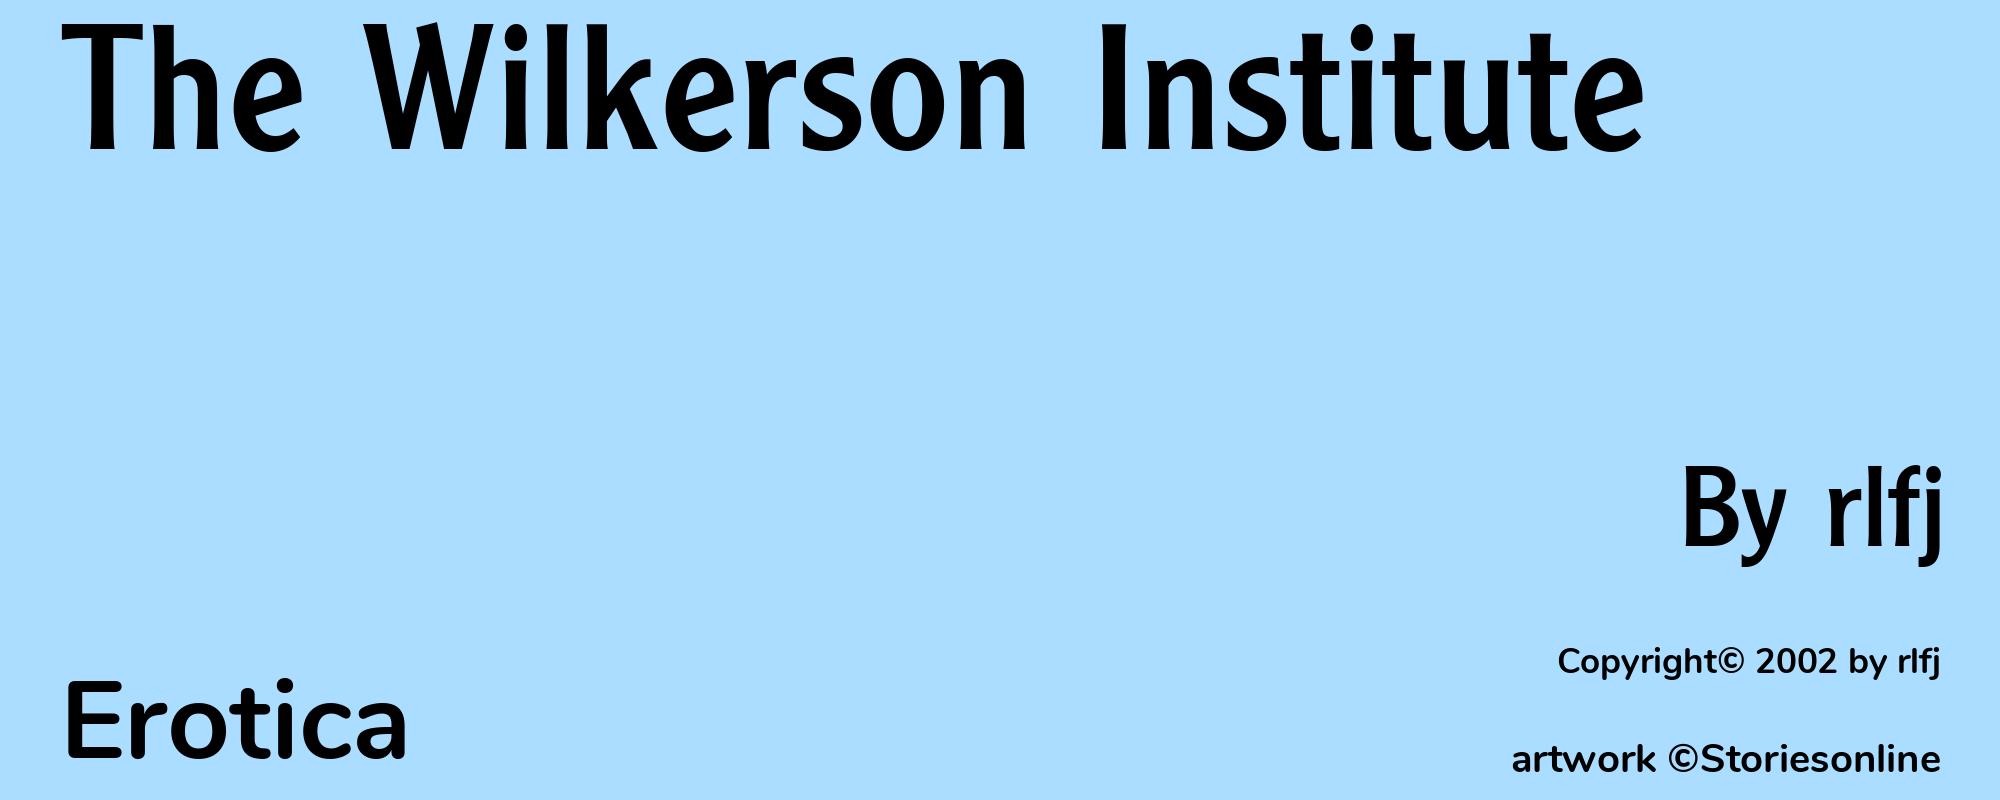 The Wilkerson Institute - Cover